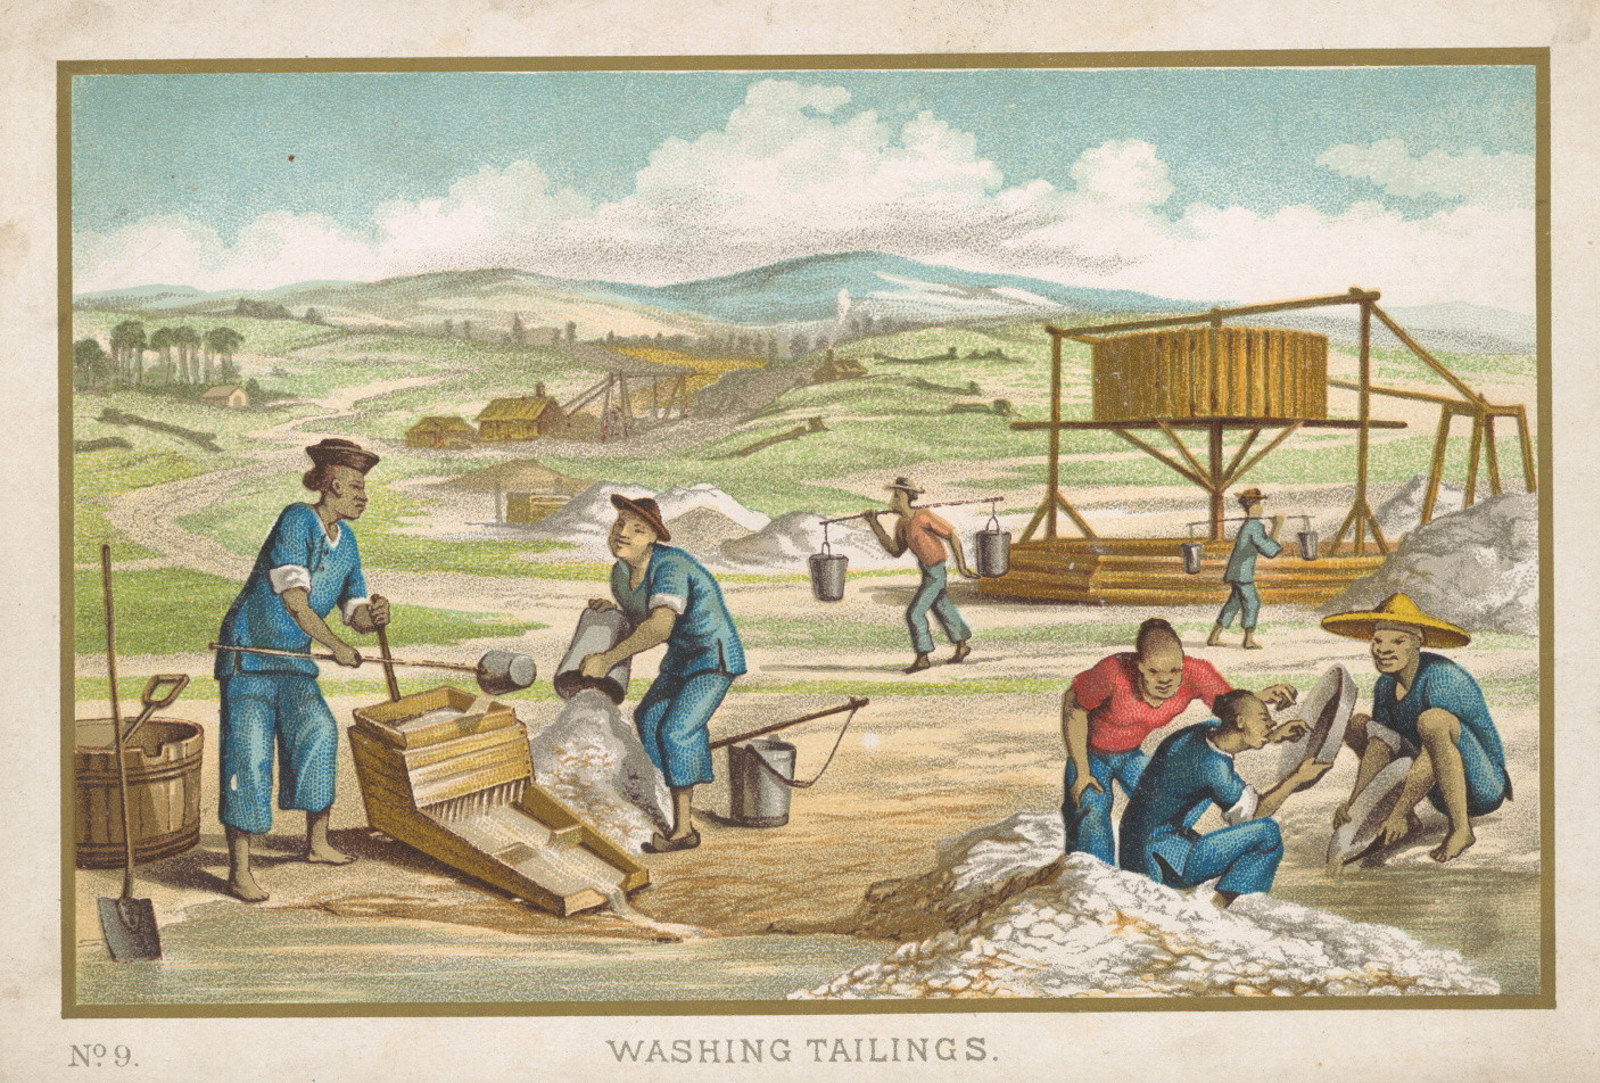 Illustration of goldfields with figures dressed in Chinese-style clothing working.